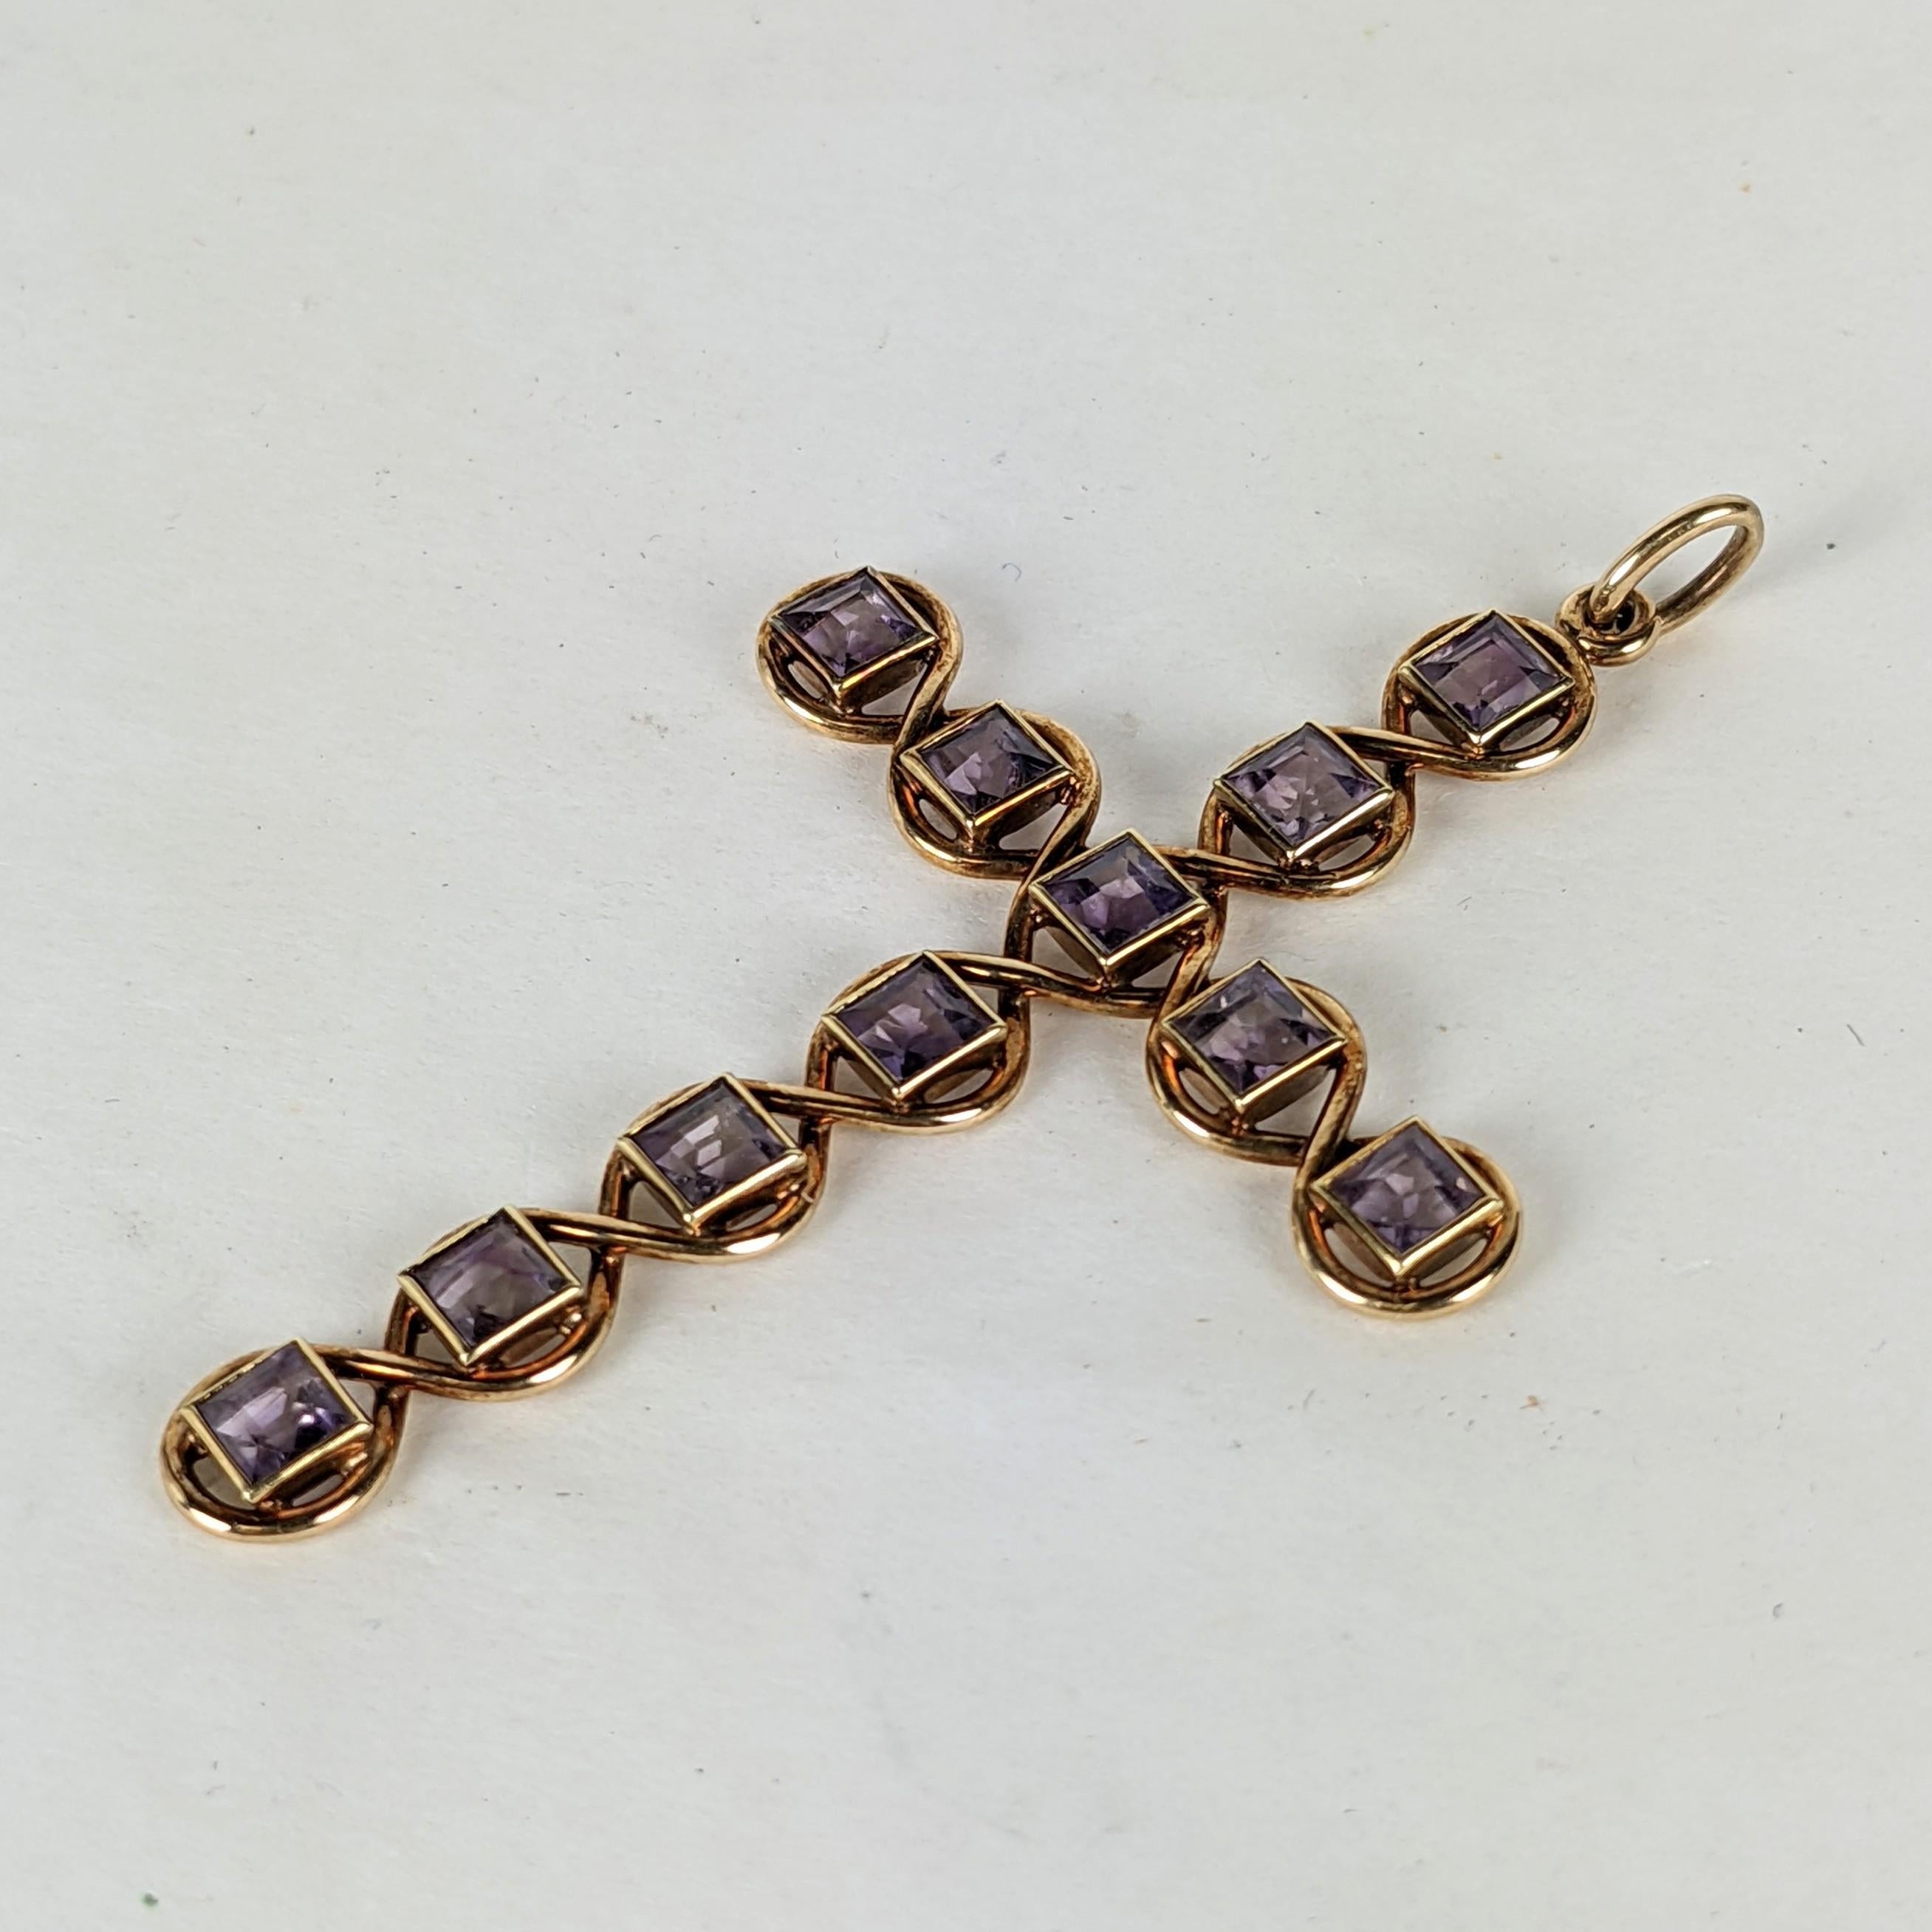 Elegant Art Nouveau Gold Cross handcrafted in 14k gold from the early 20th Century. Square cut purple stones are likely amythests or pastes. The stones are set in a 14k gold wire frame which wraps around each stone in a continuous fashion.  1900